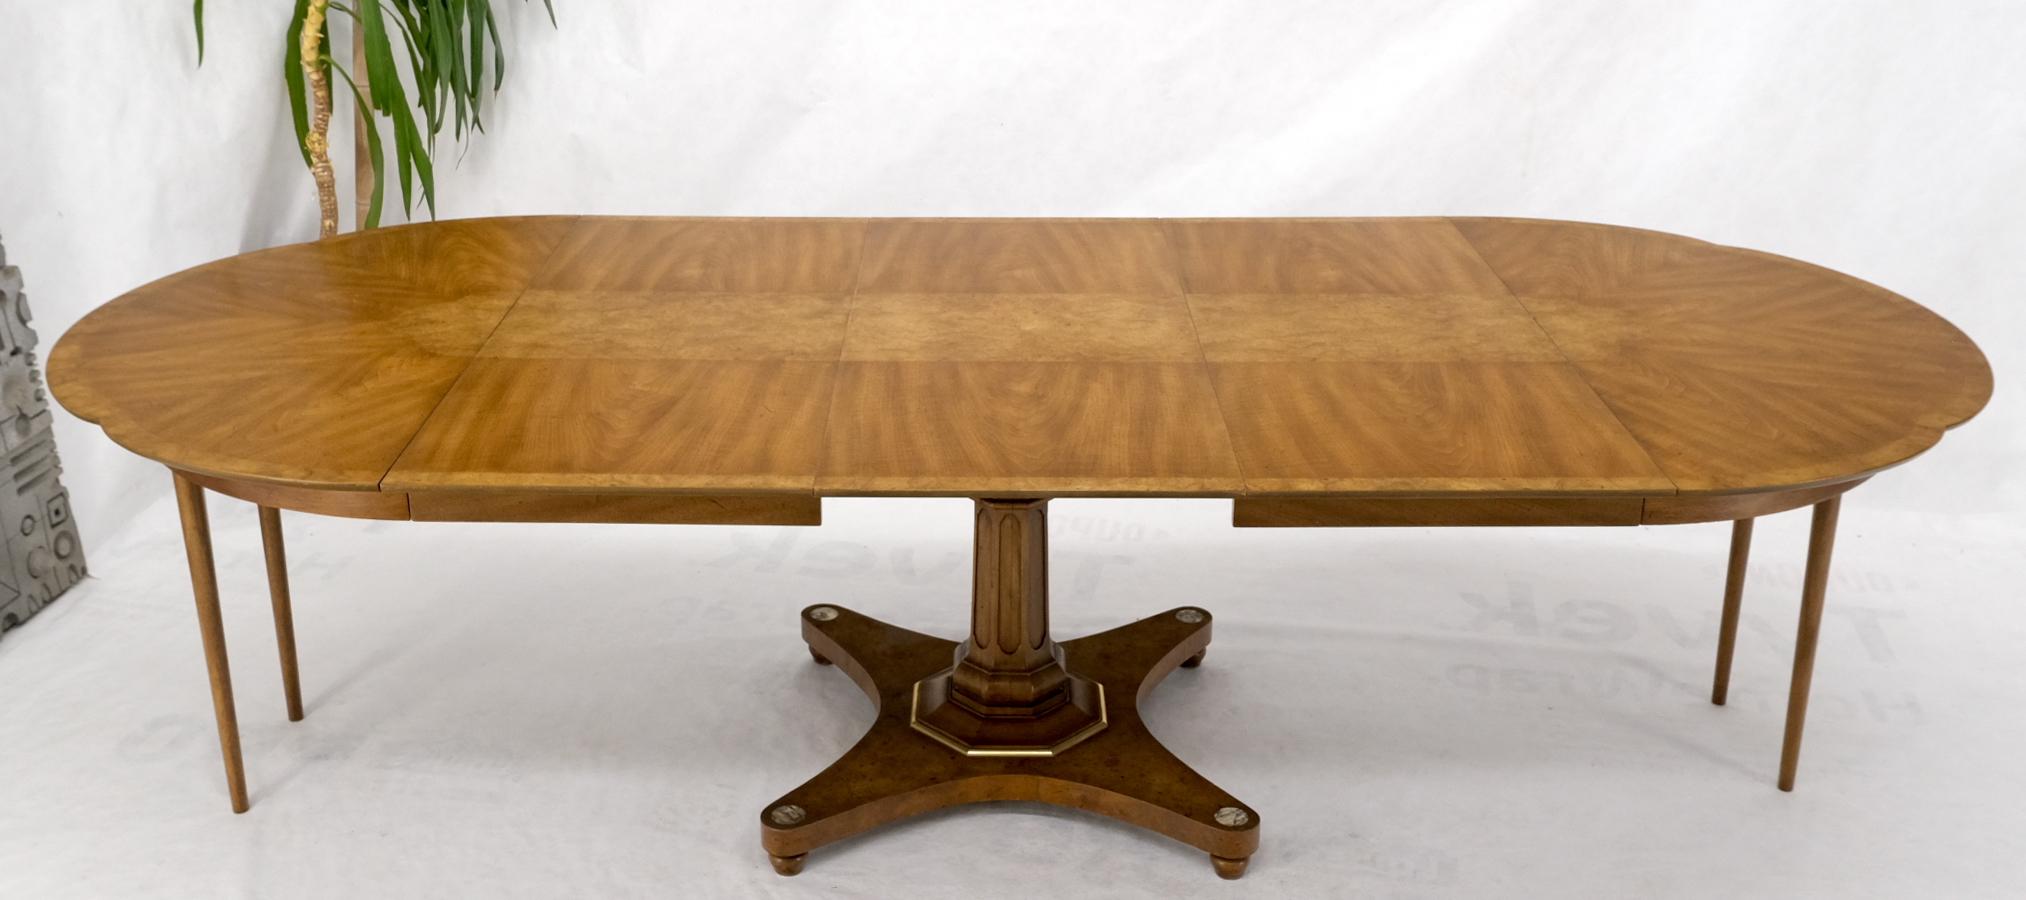 Round Clove Shape Burl Walnut Dining Conference Table w/ 3 Extension Leaves For Sale 3